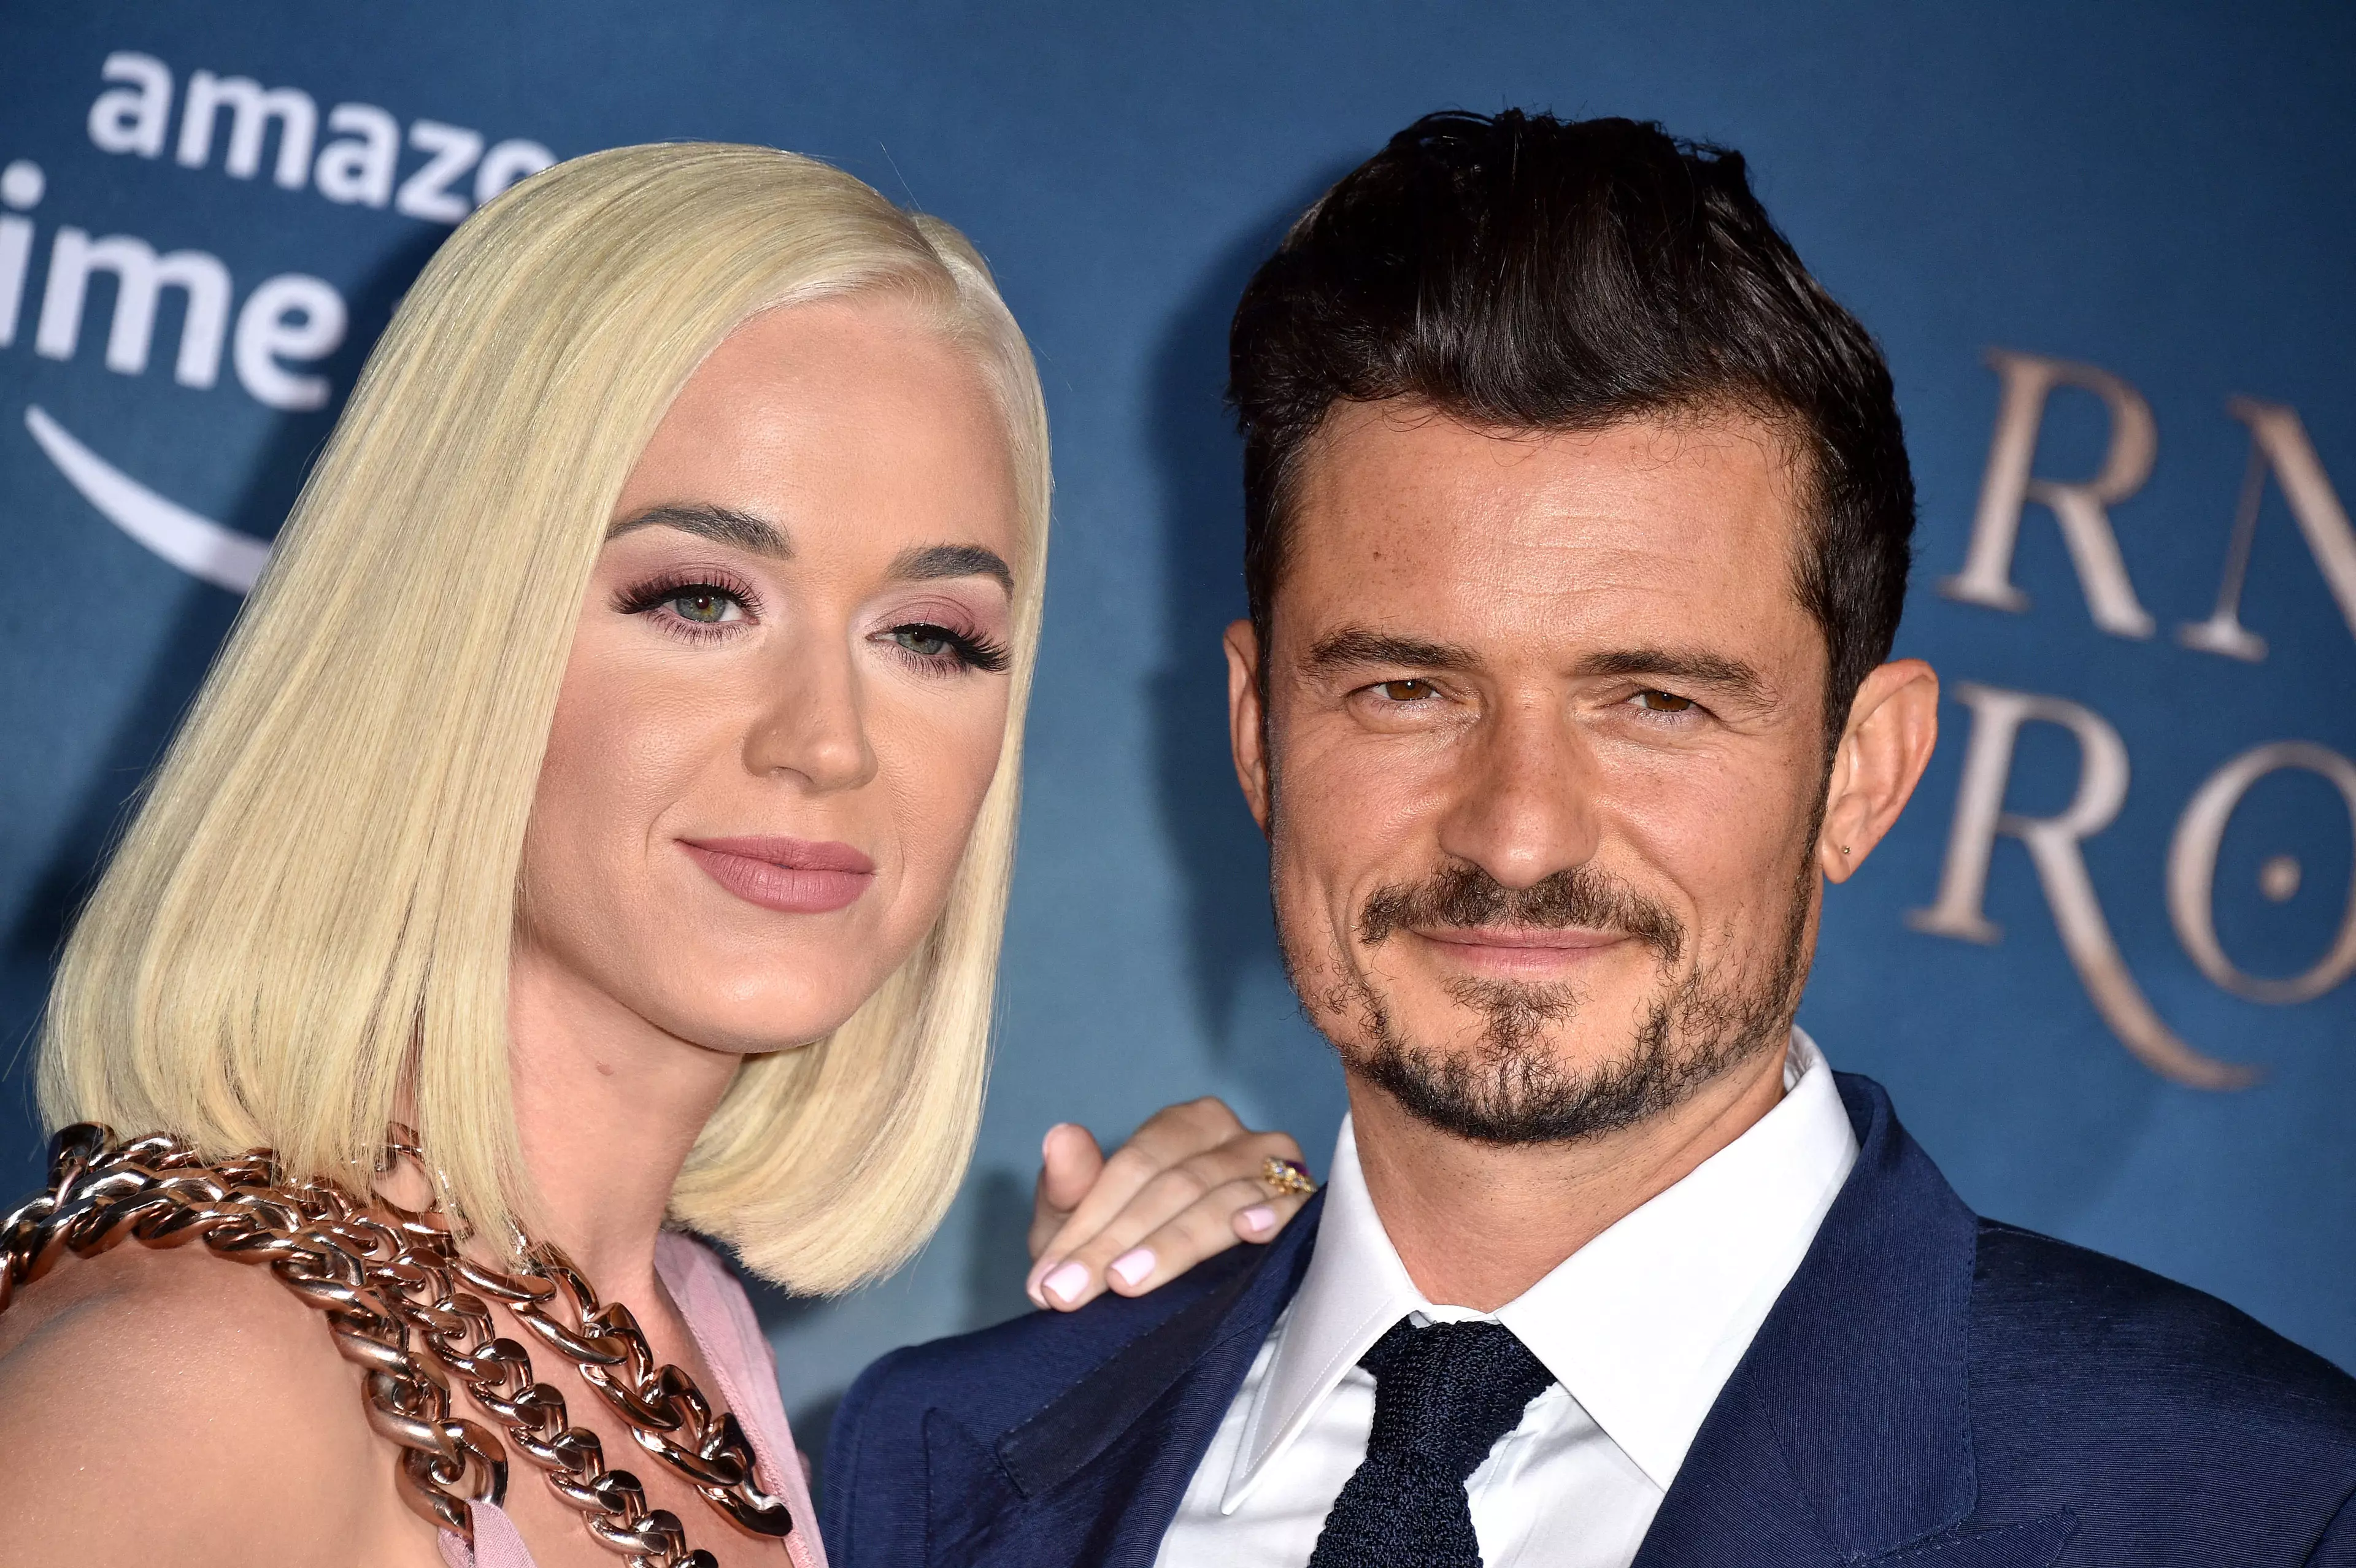 Katy Perry recently gave birth to her first child with Orlando Bloom (